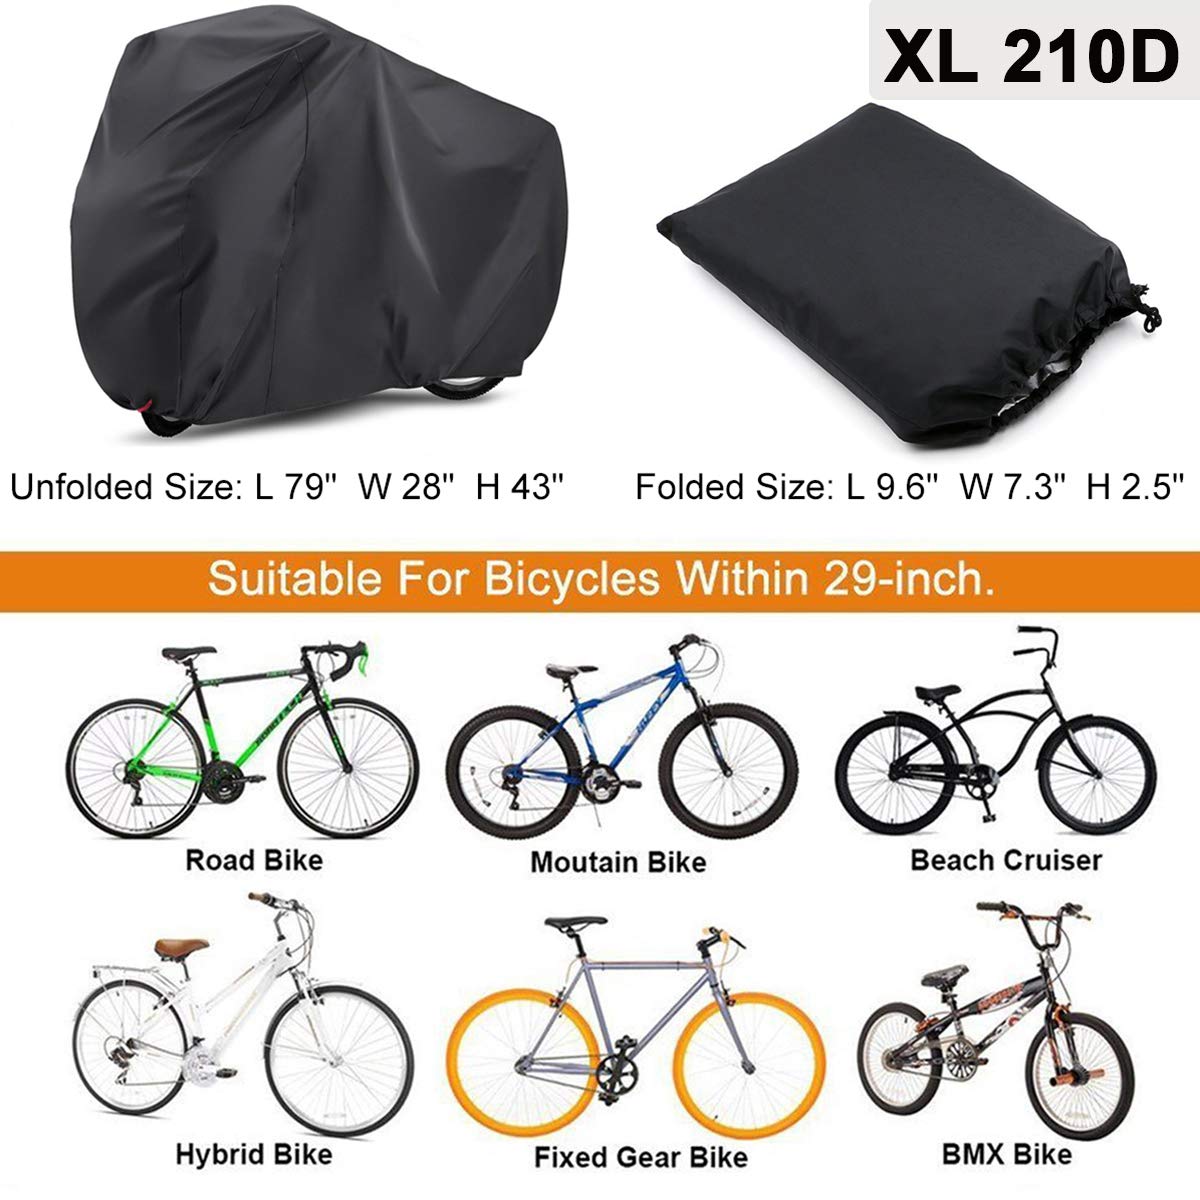 China Suppliers Bike Cover Outdoor Storage Waterproof Bike Cover For Bike Rack Cover Cycle